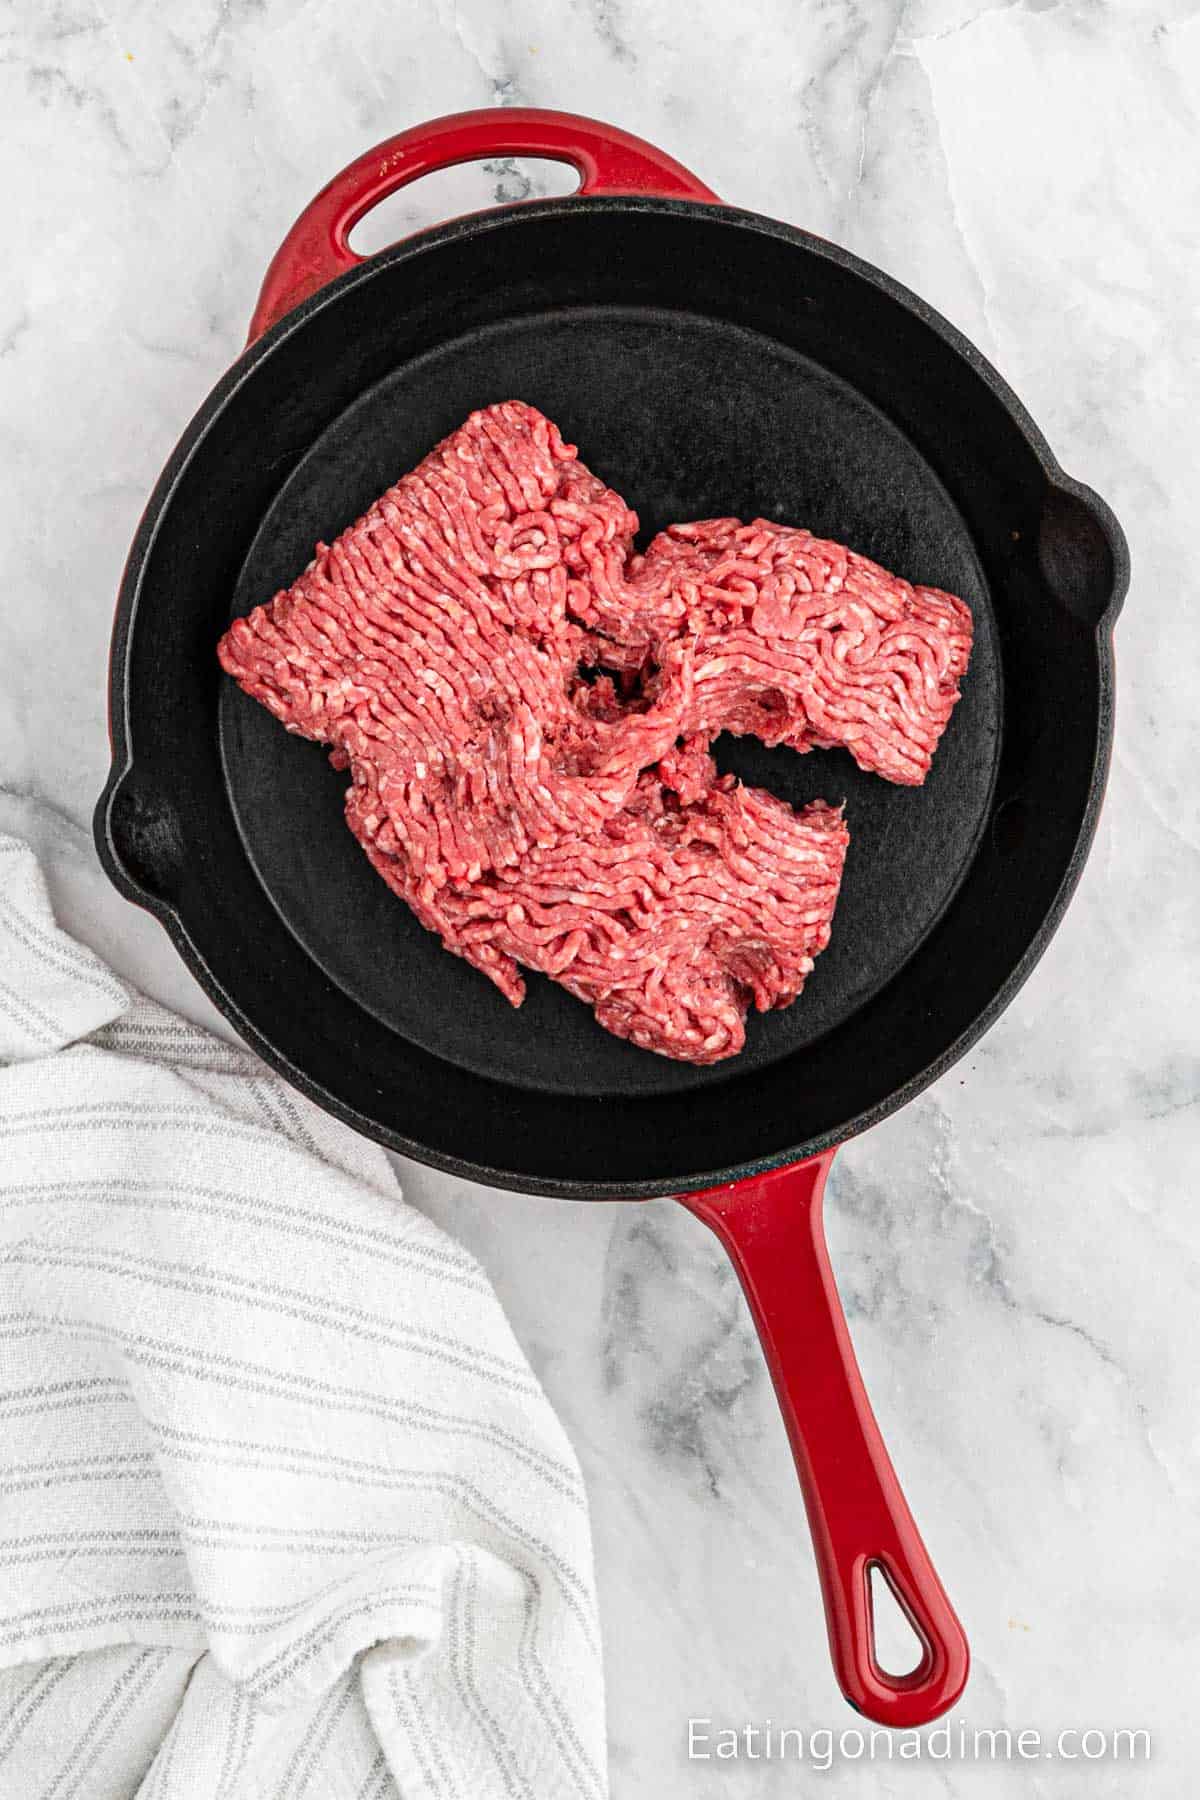 Cooking ground beef in a skillet